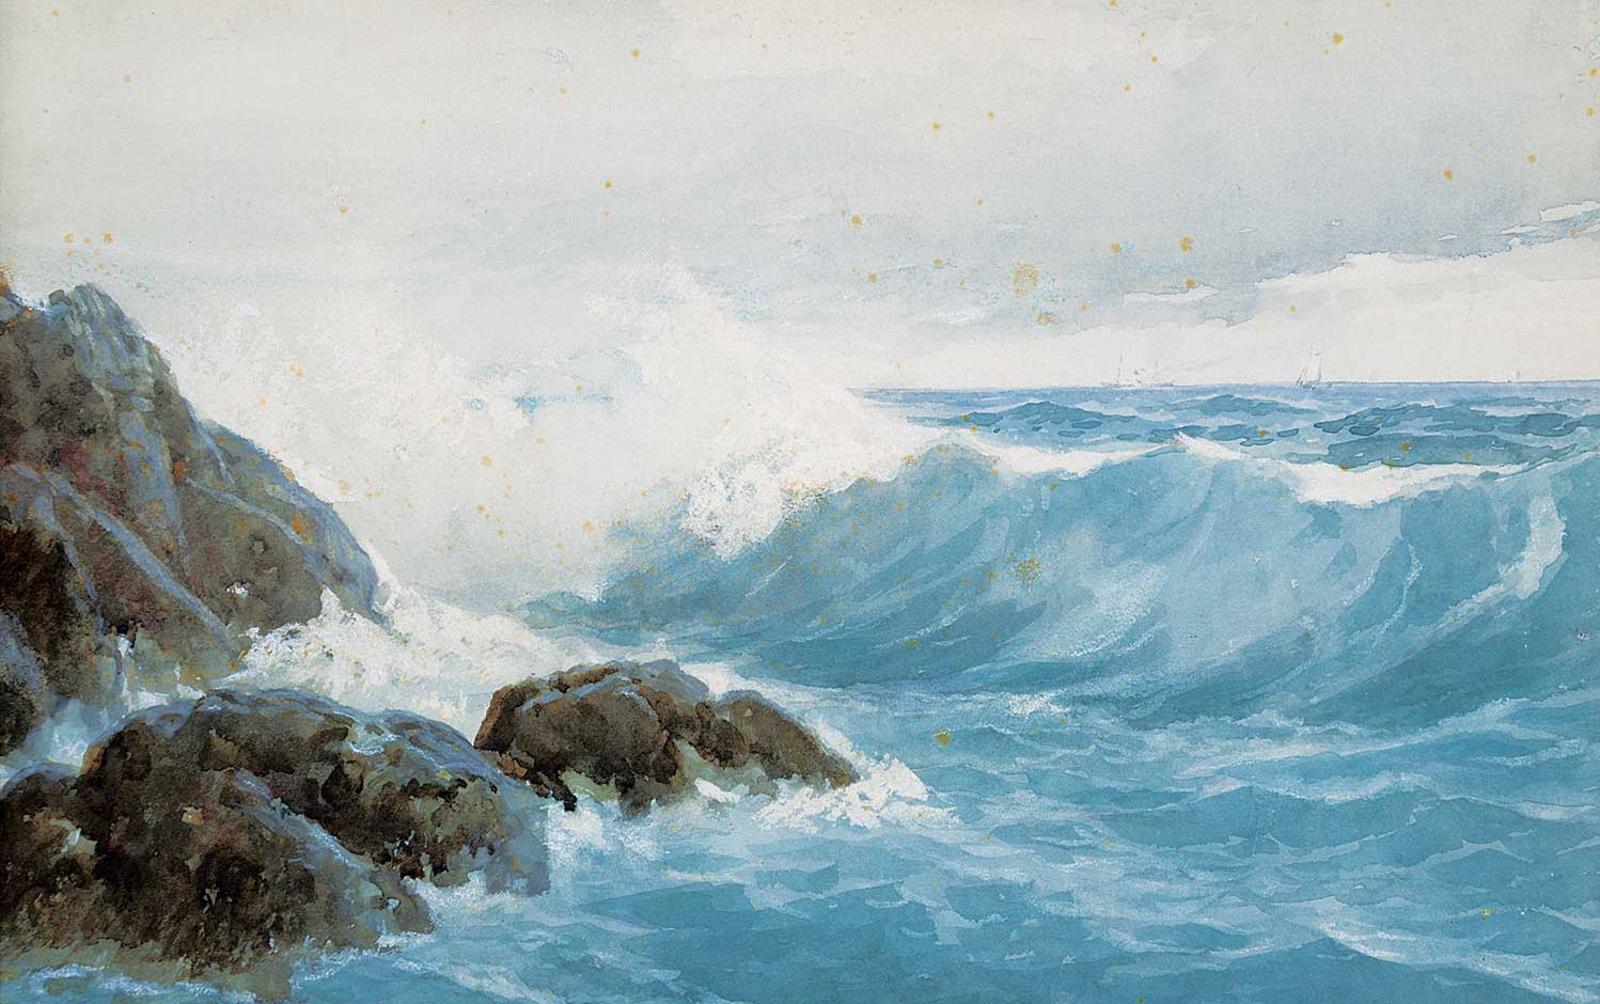 Frederic Martlett Bell-Smith (1846-1923) - Coast of Maine